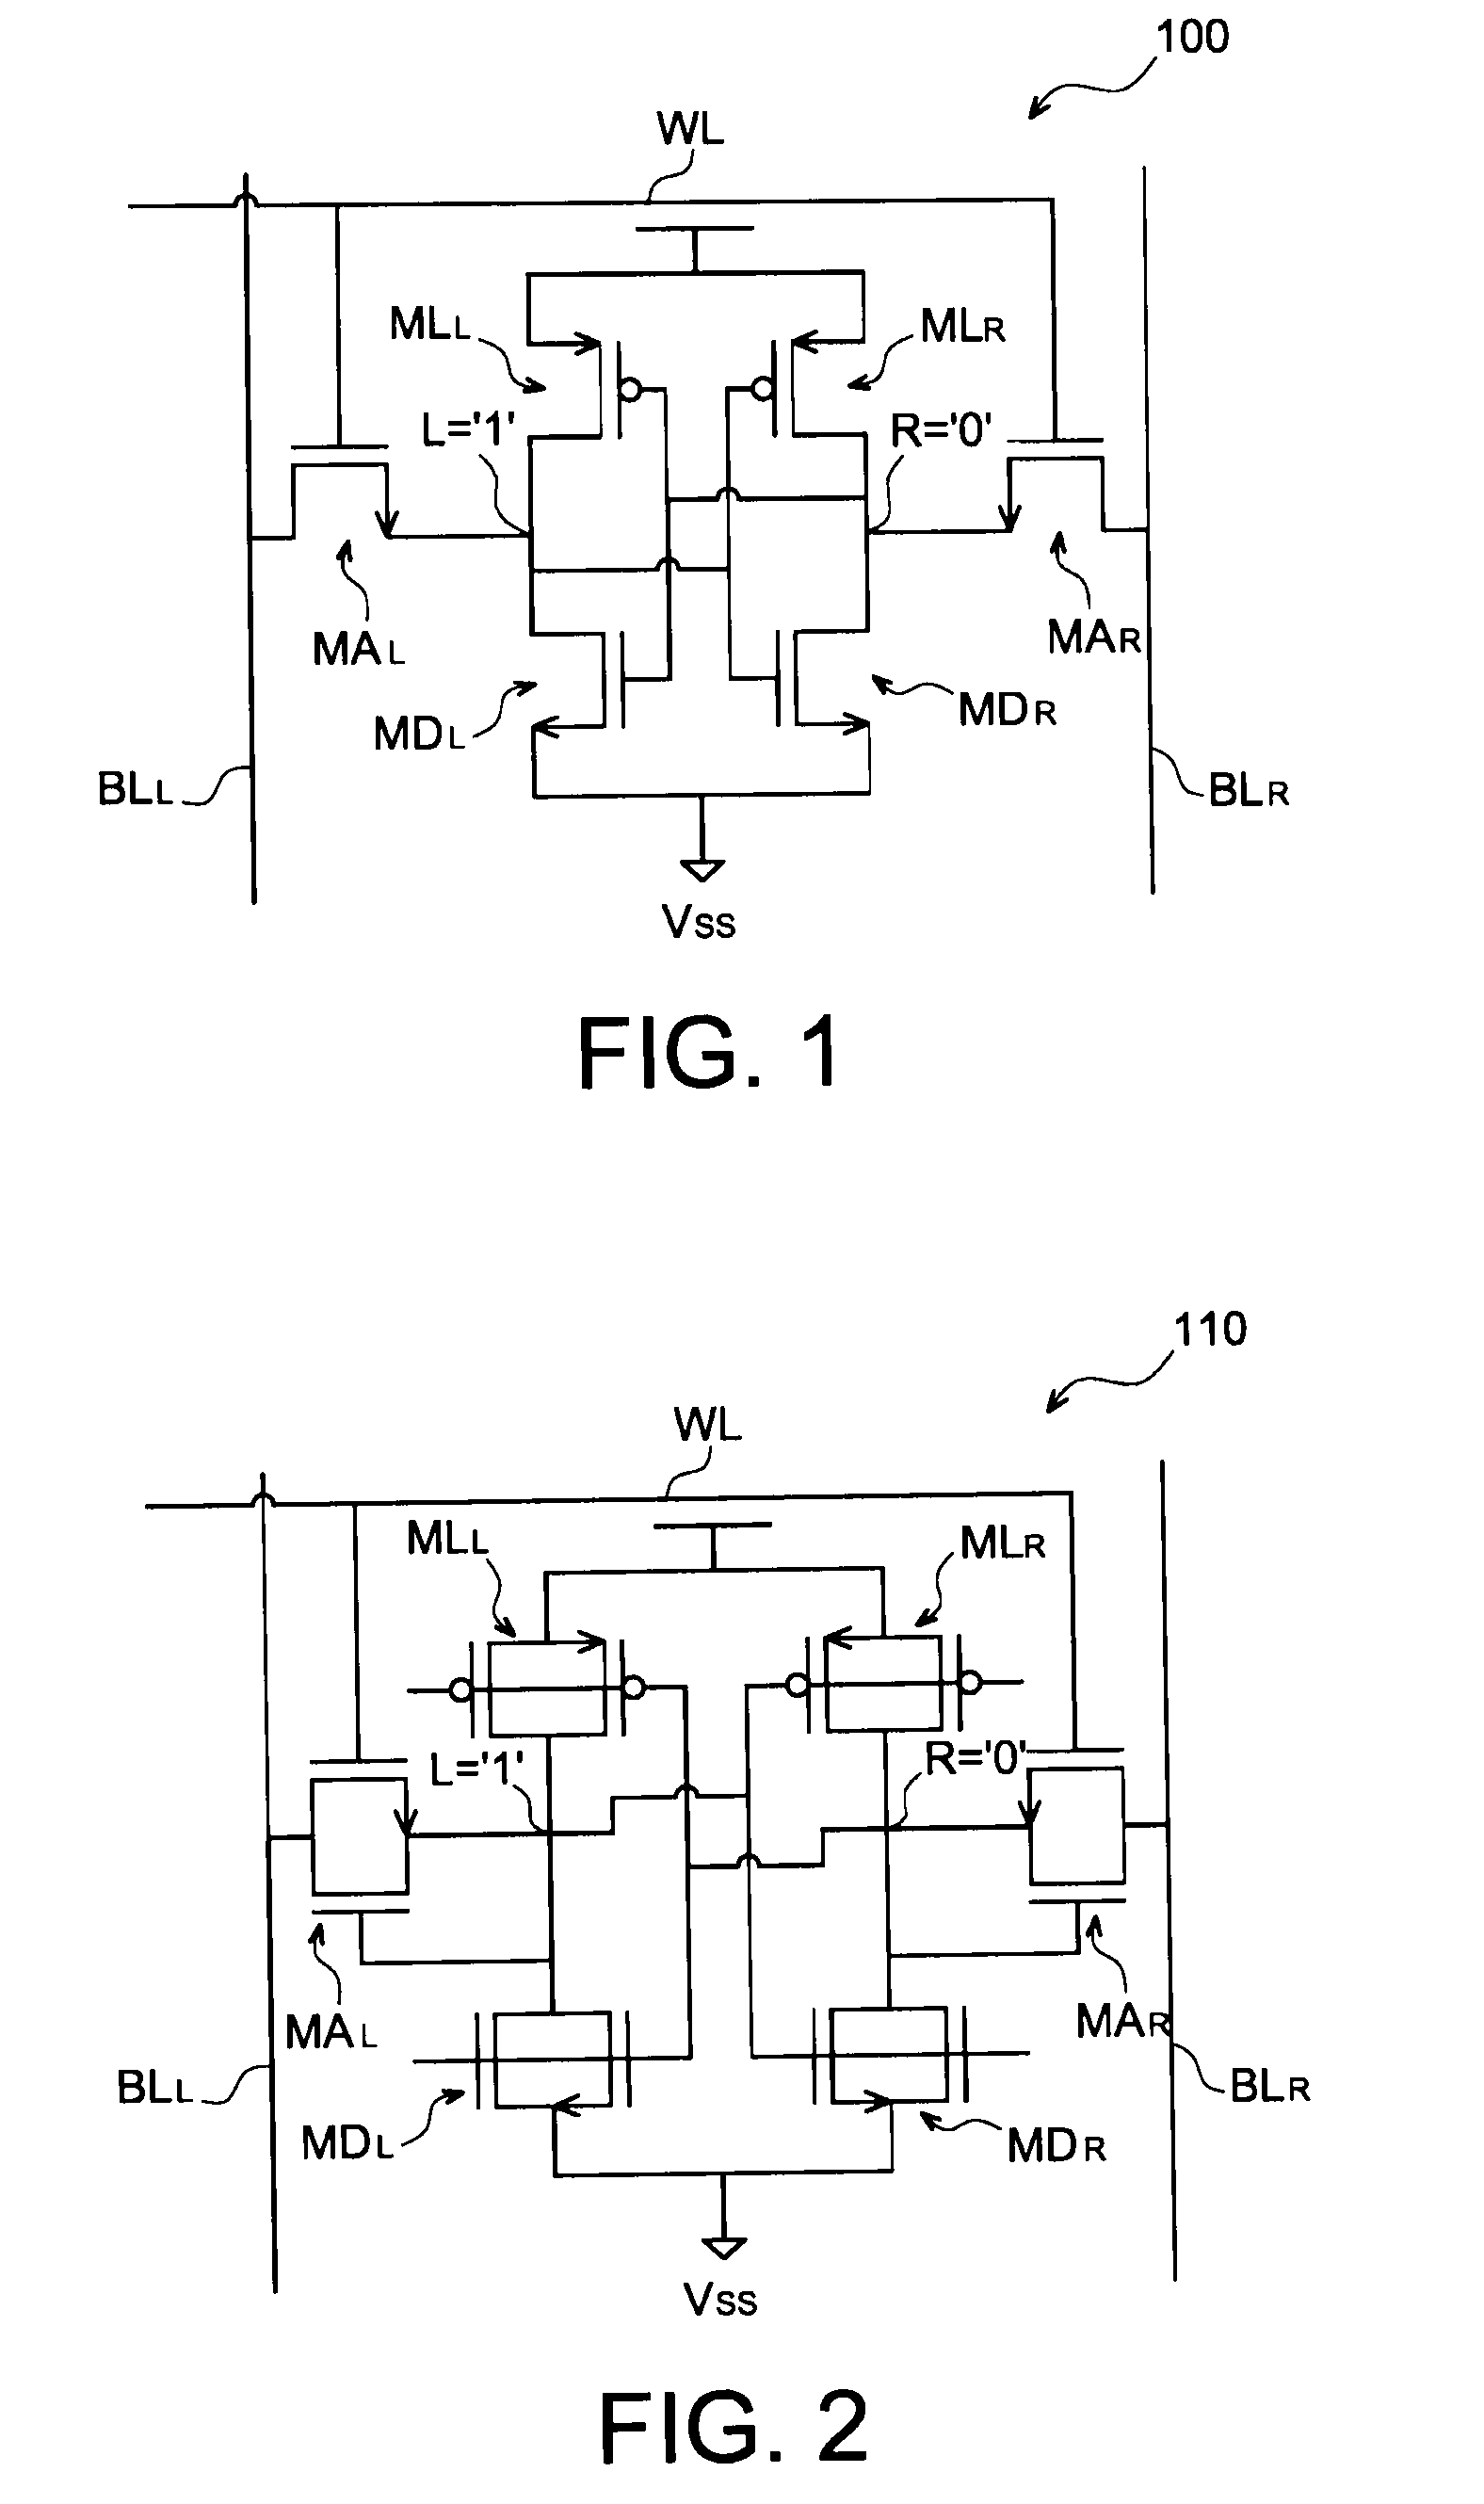 SRAM memory cell with double gate transistors provided with means to improve the write margin